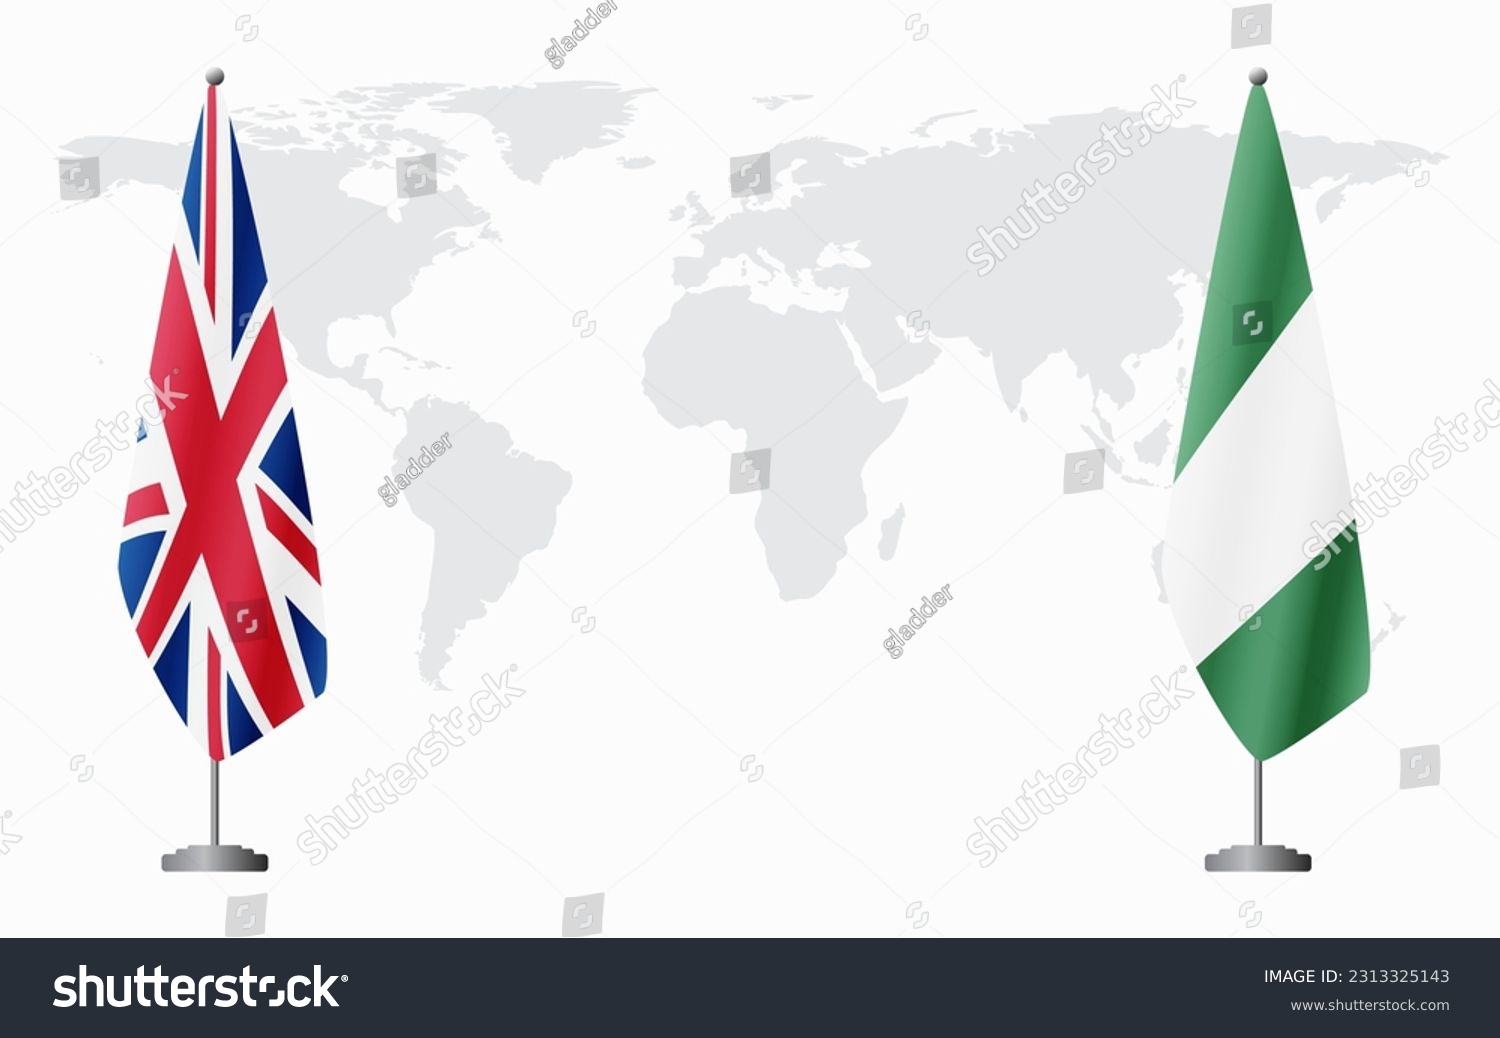 SVG of United Kingdom and Nigeria flags for official meeting against background of world map. svg